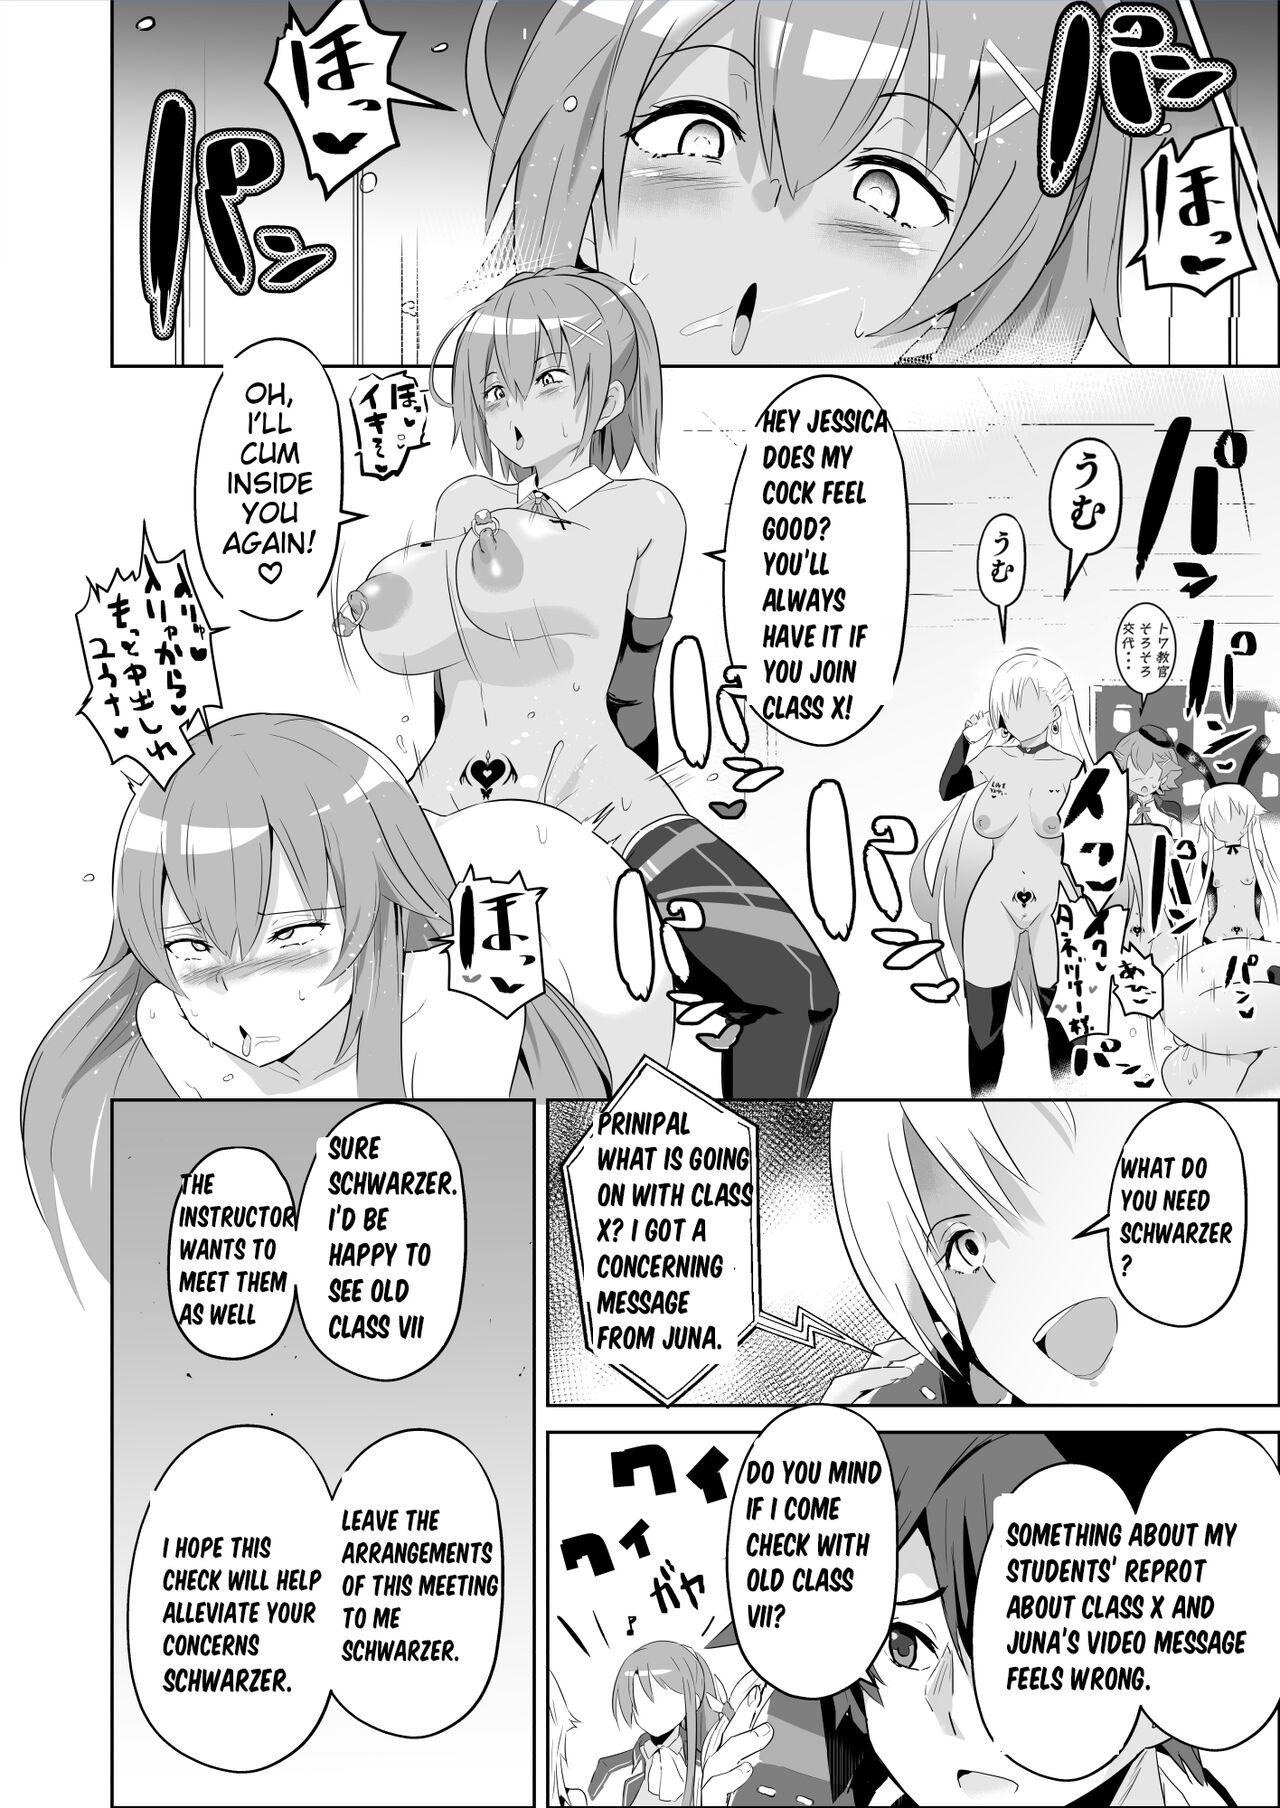 Hot Milf Hypnosis of the New Class VII - Aftermath - The legend of heroes | eiyuu densetsu Blowjob - Page 2